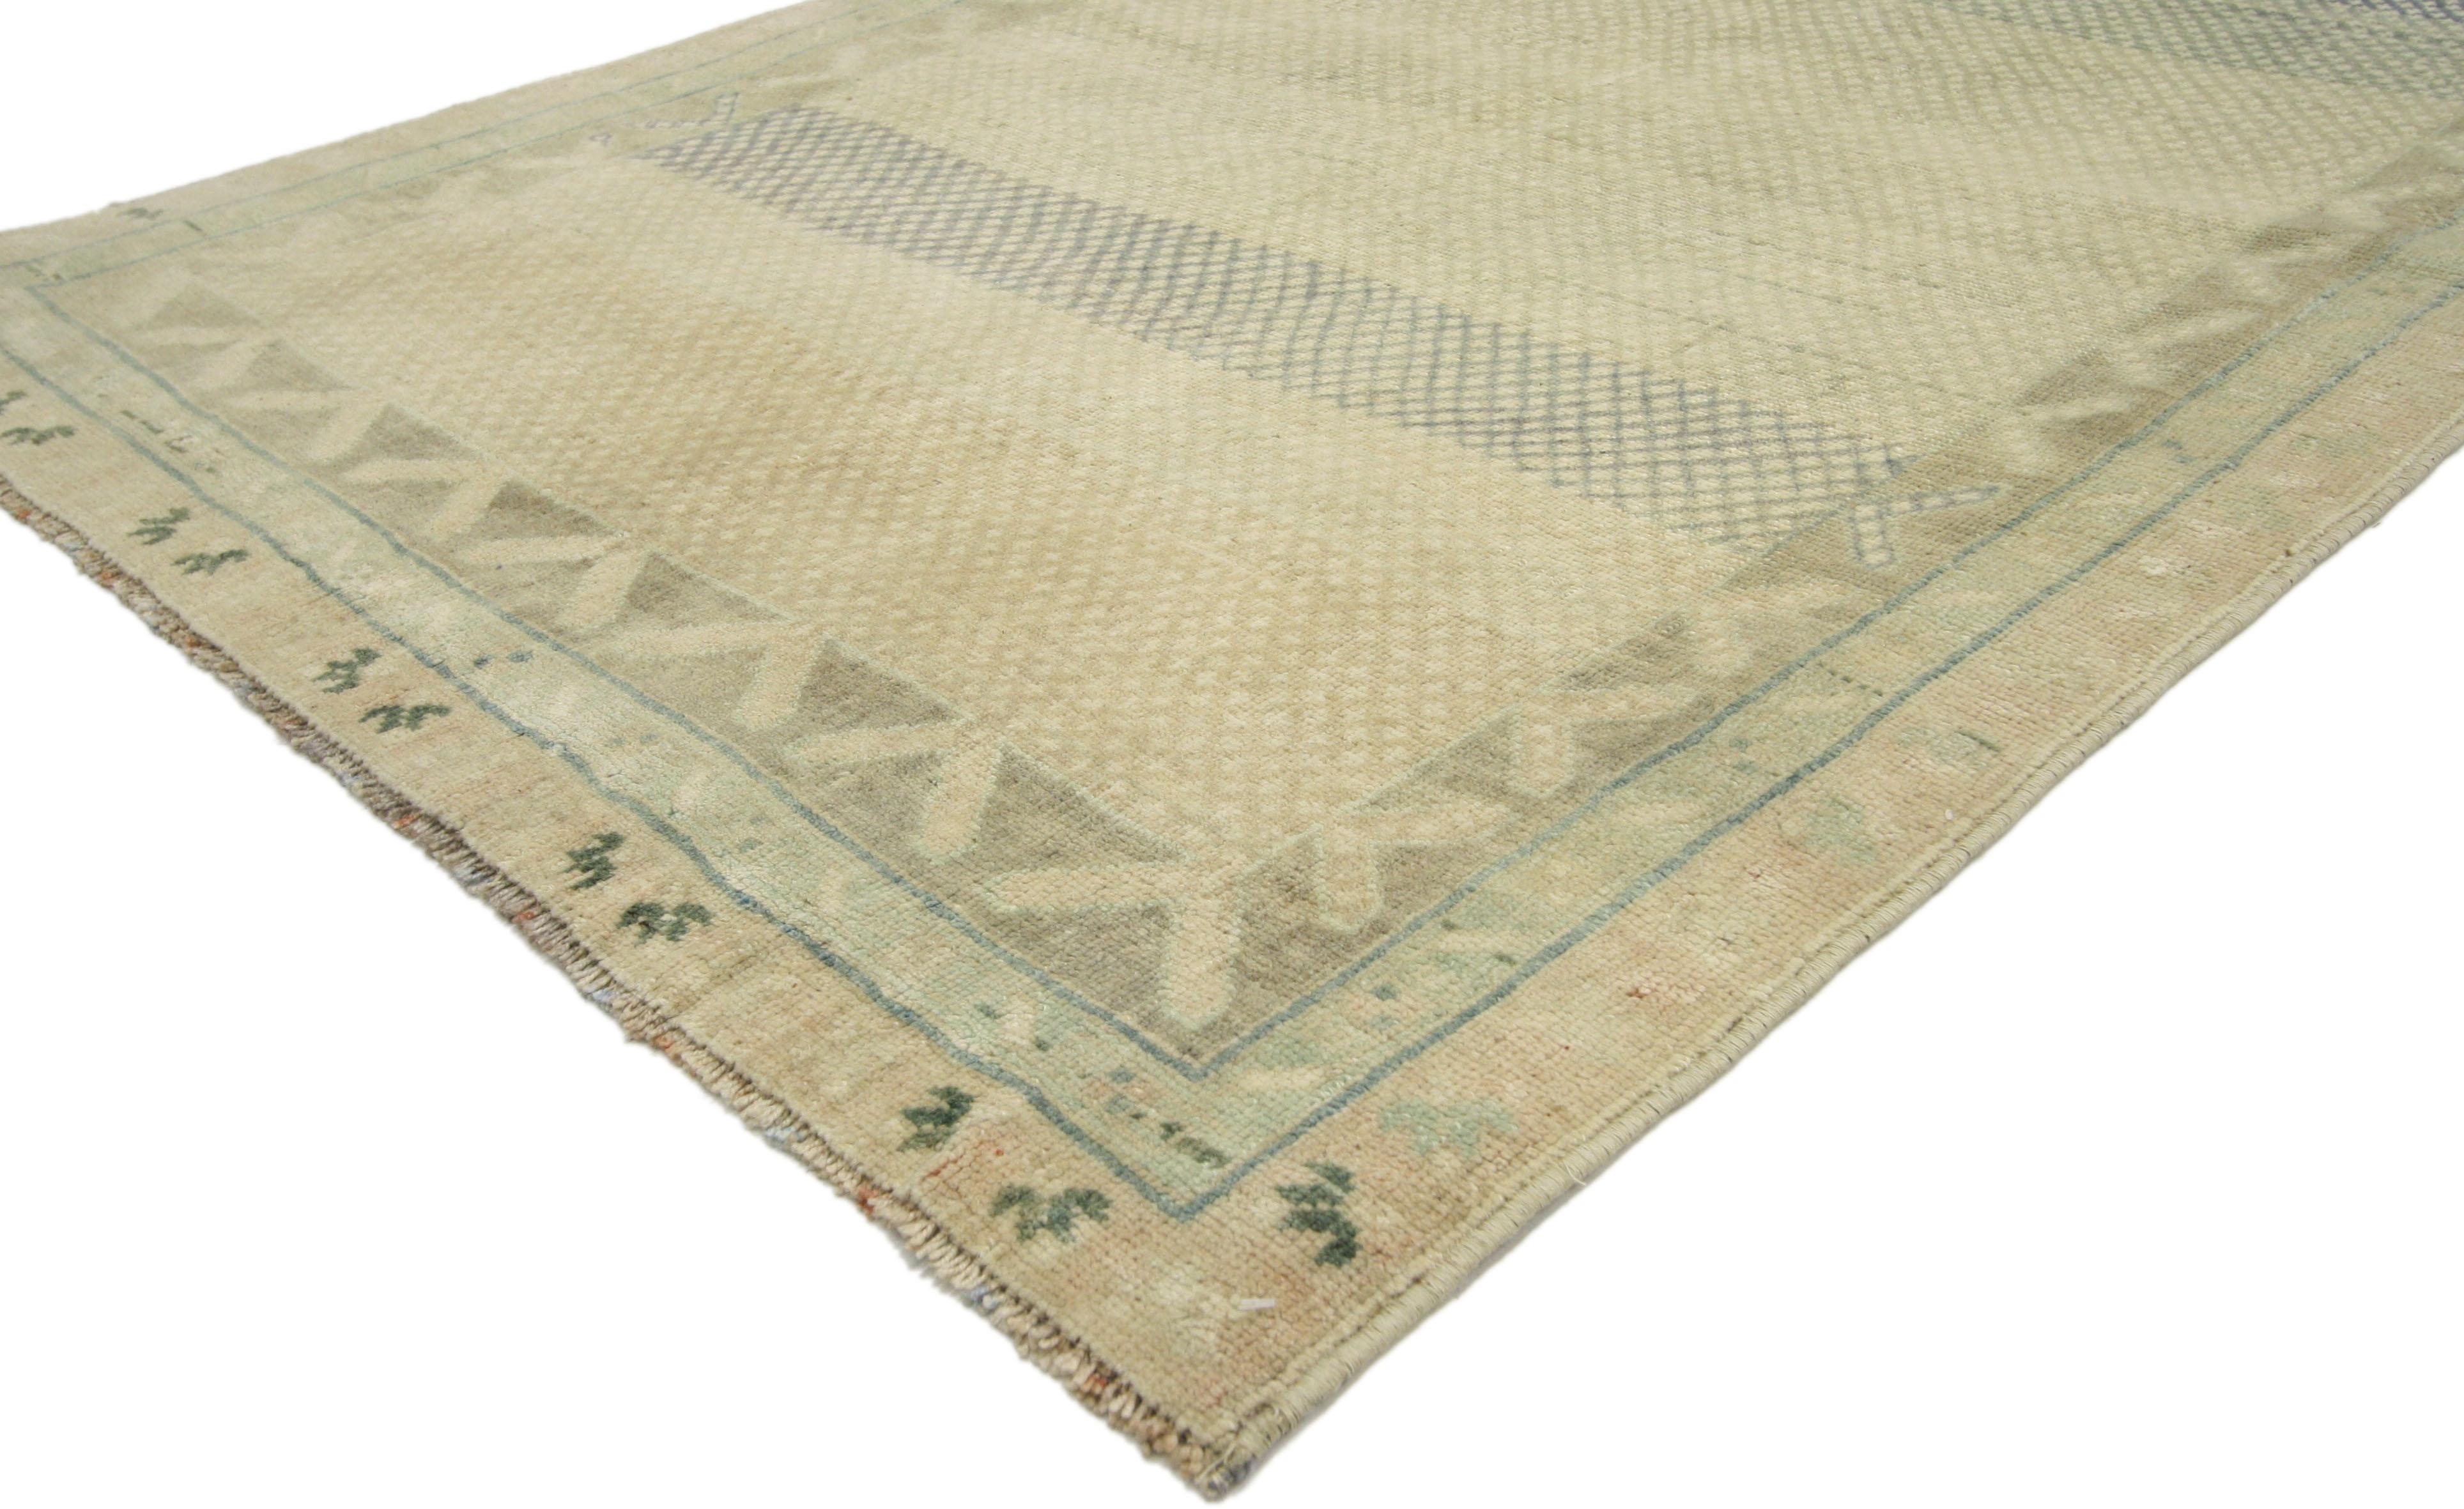 52423 Rustic French style vintage Turkish Oushak rug for kitchen, bathroom, or entry rug. Ethereal and atmospheric, this hand knotted wool vintage Turkish Oushak rug soothes and transports the viewer with a calm color palate and soft hues. Hand